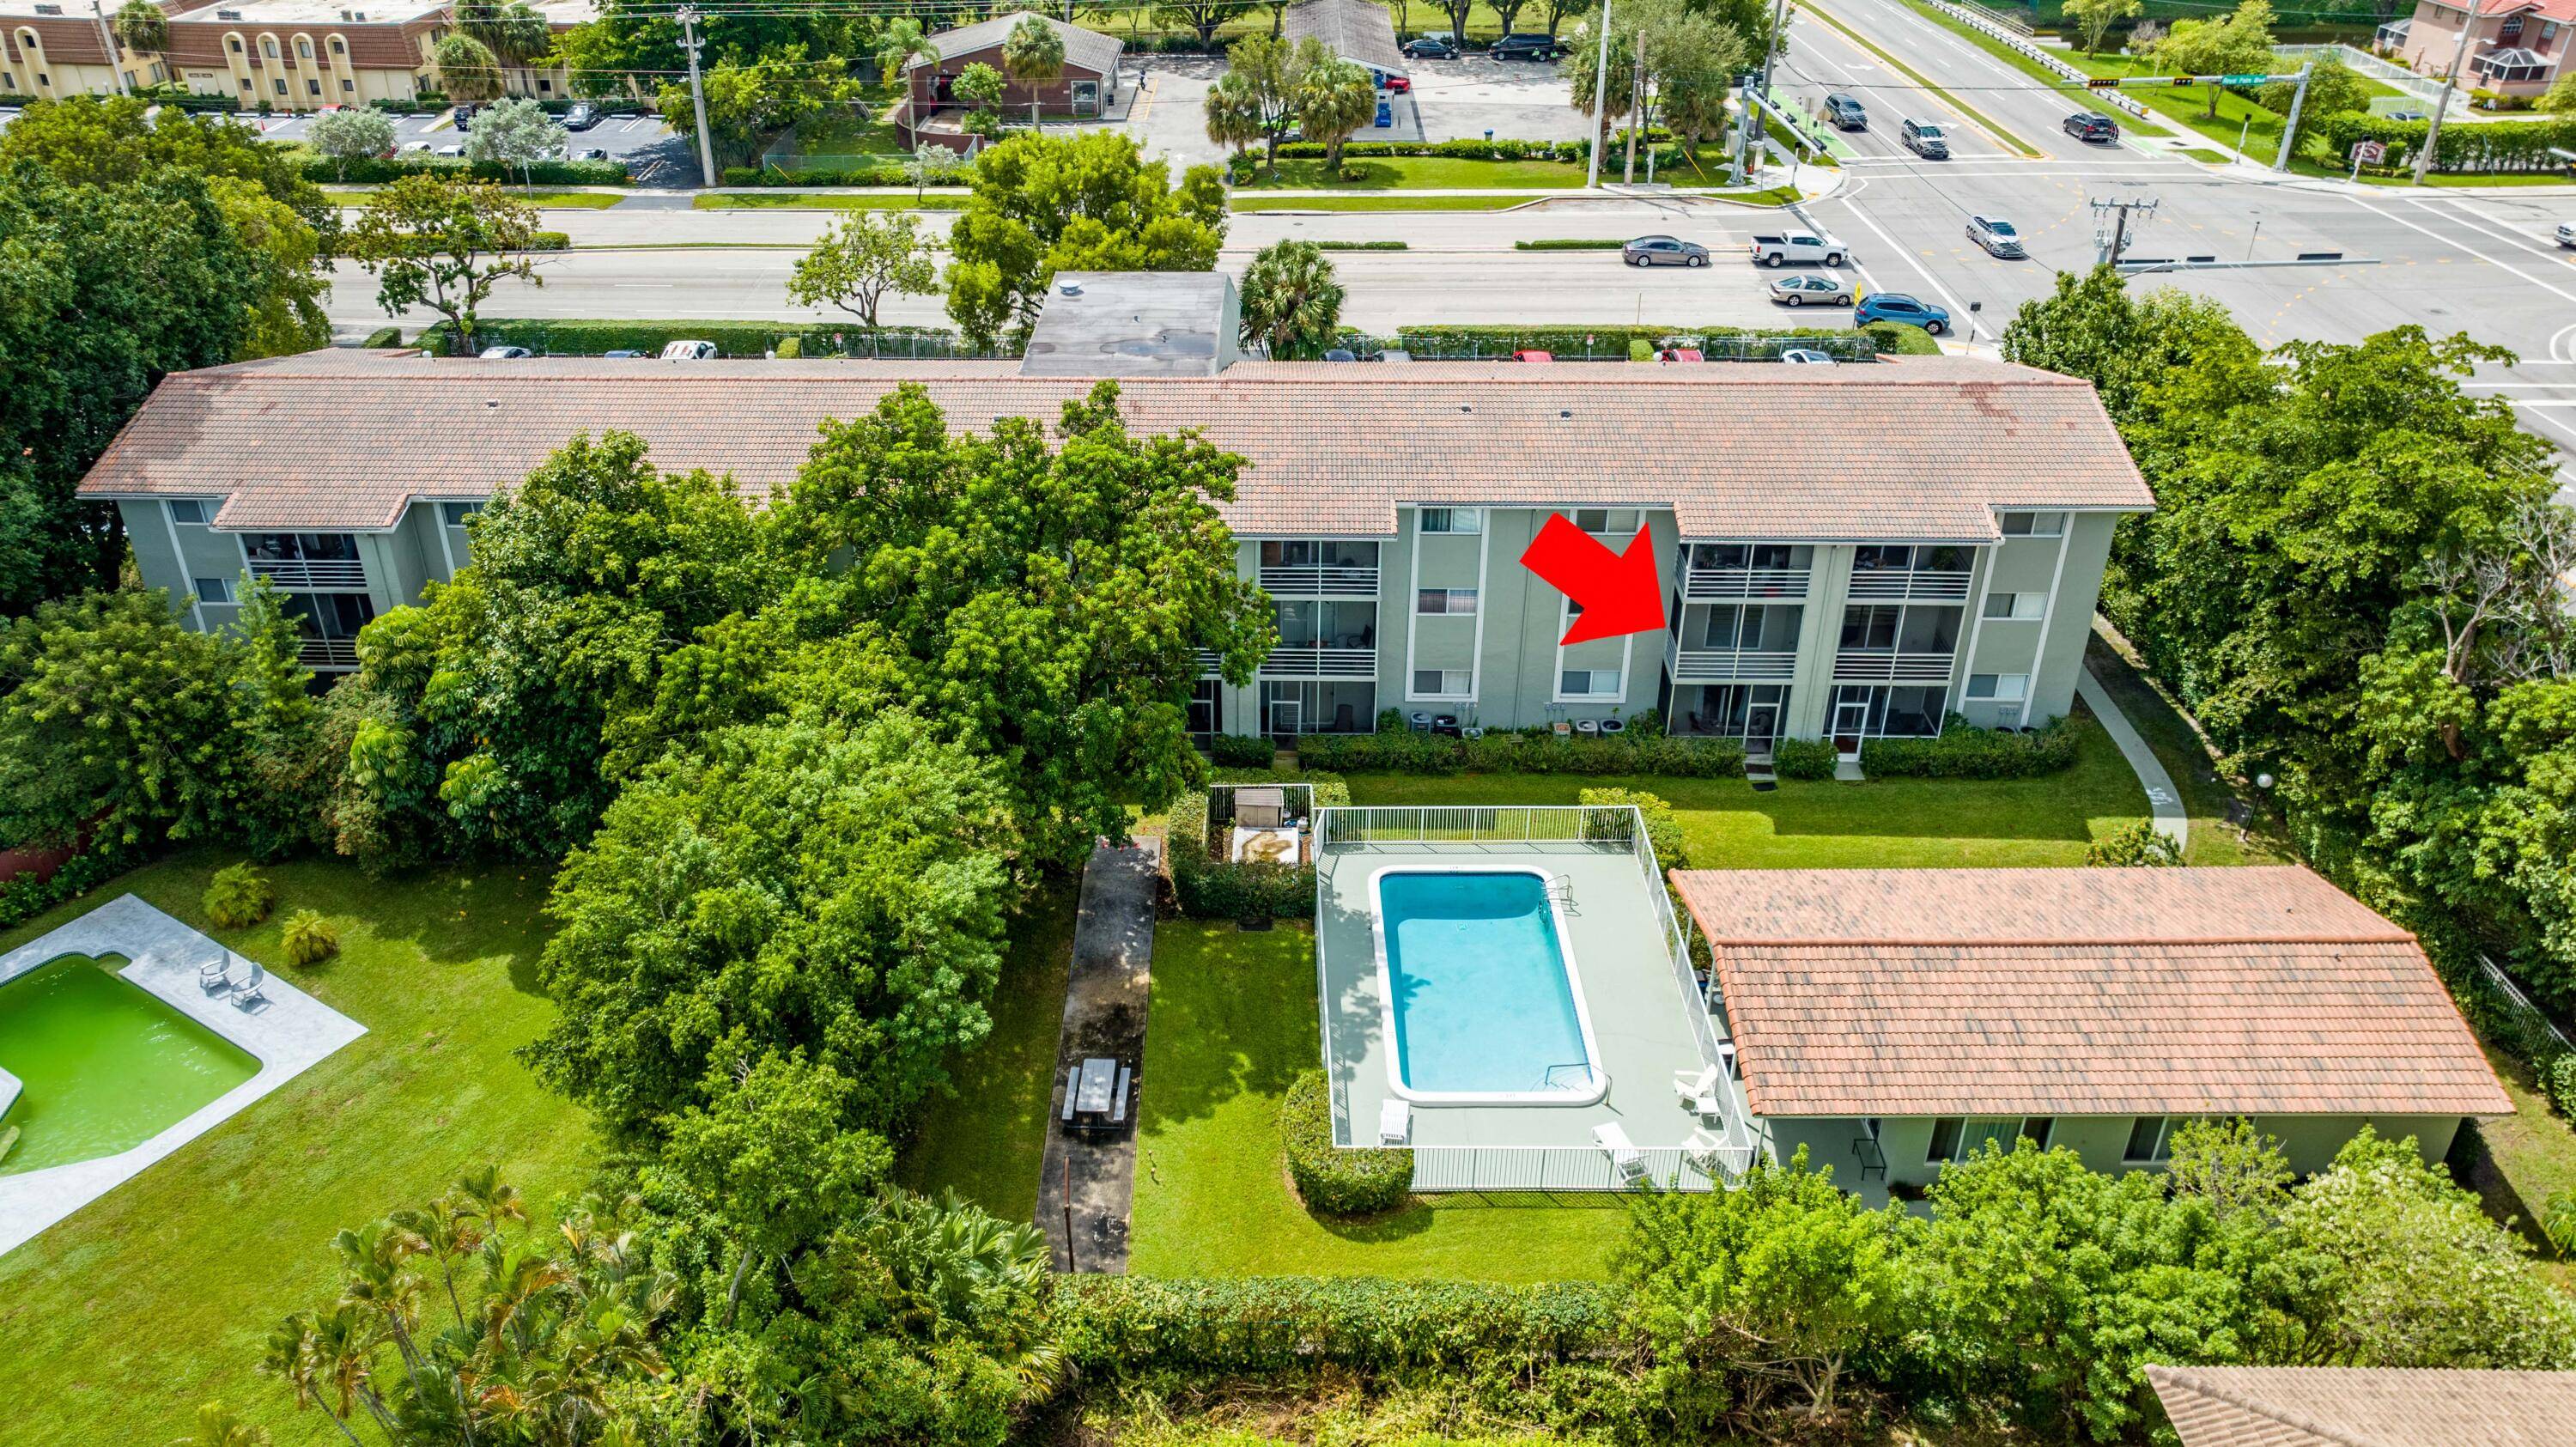 Come see this 2 2 condo in the heart of Coral Springs.